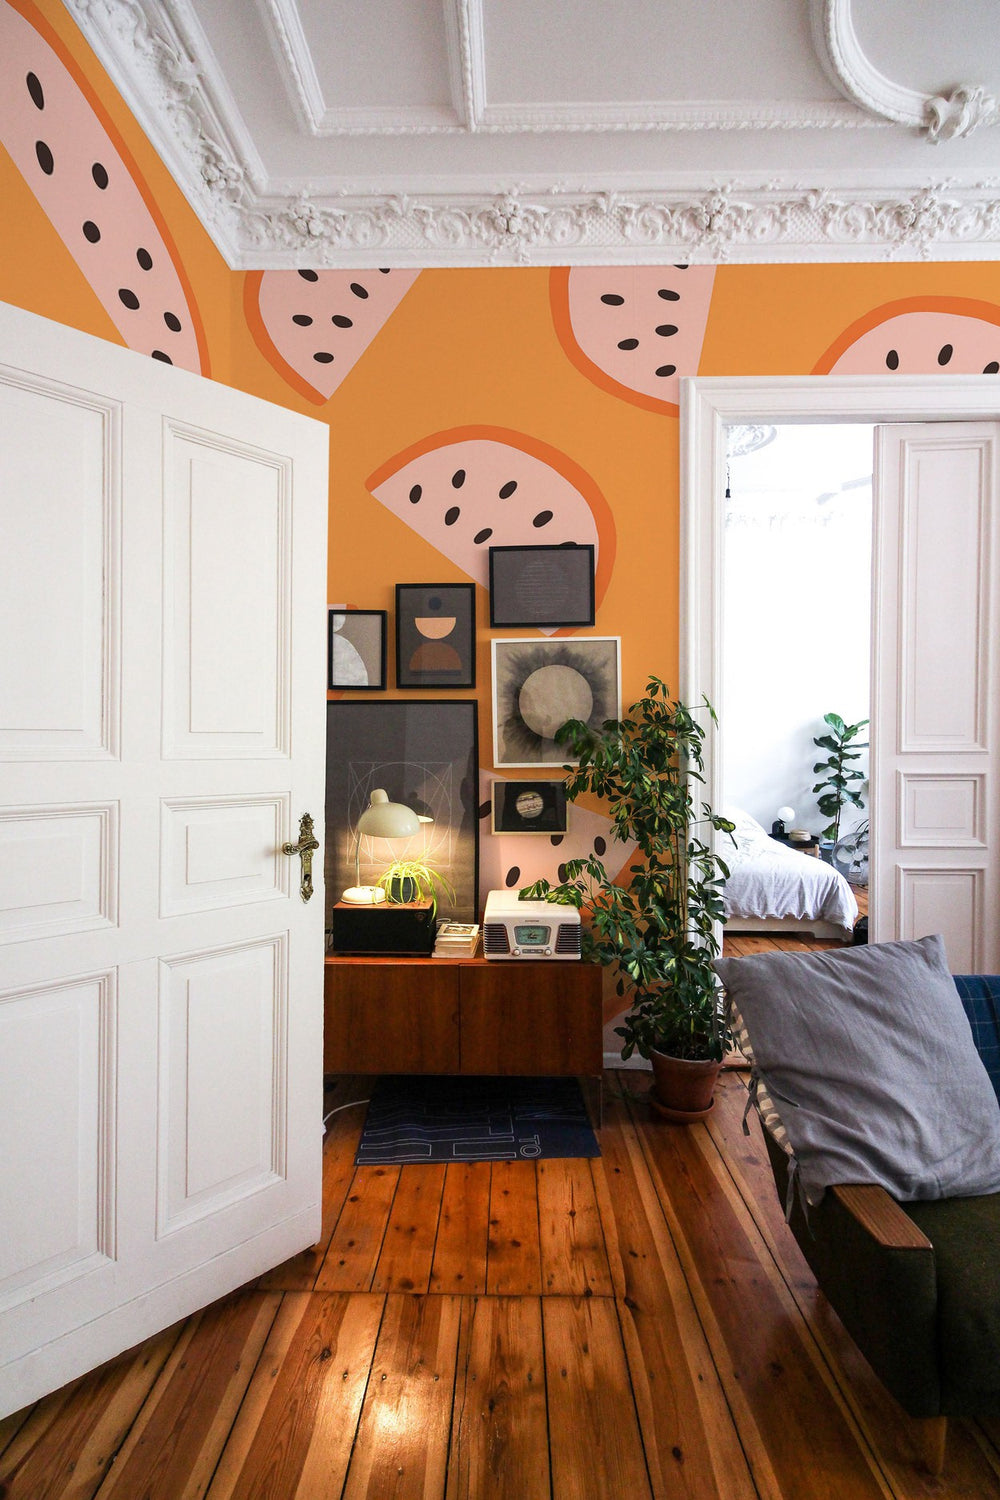 A cozy living room interior with a geometric wall mural in orange and pink tones, featuring elegant white doors, wooden flooring, and a display cabinet with decorative items.